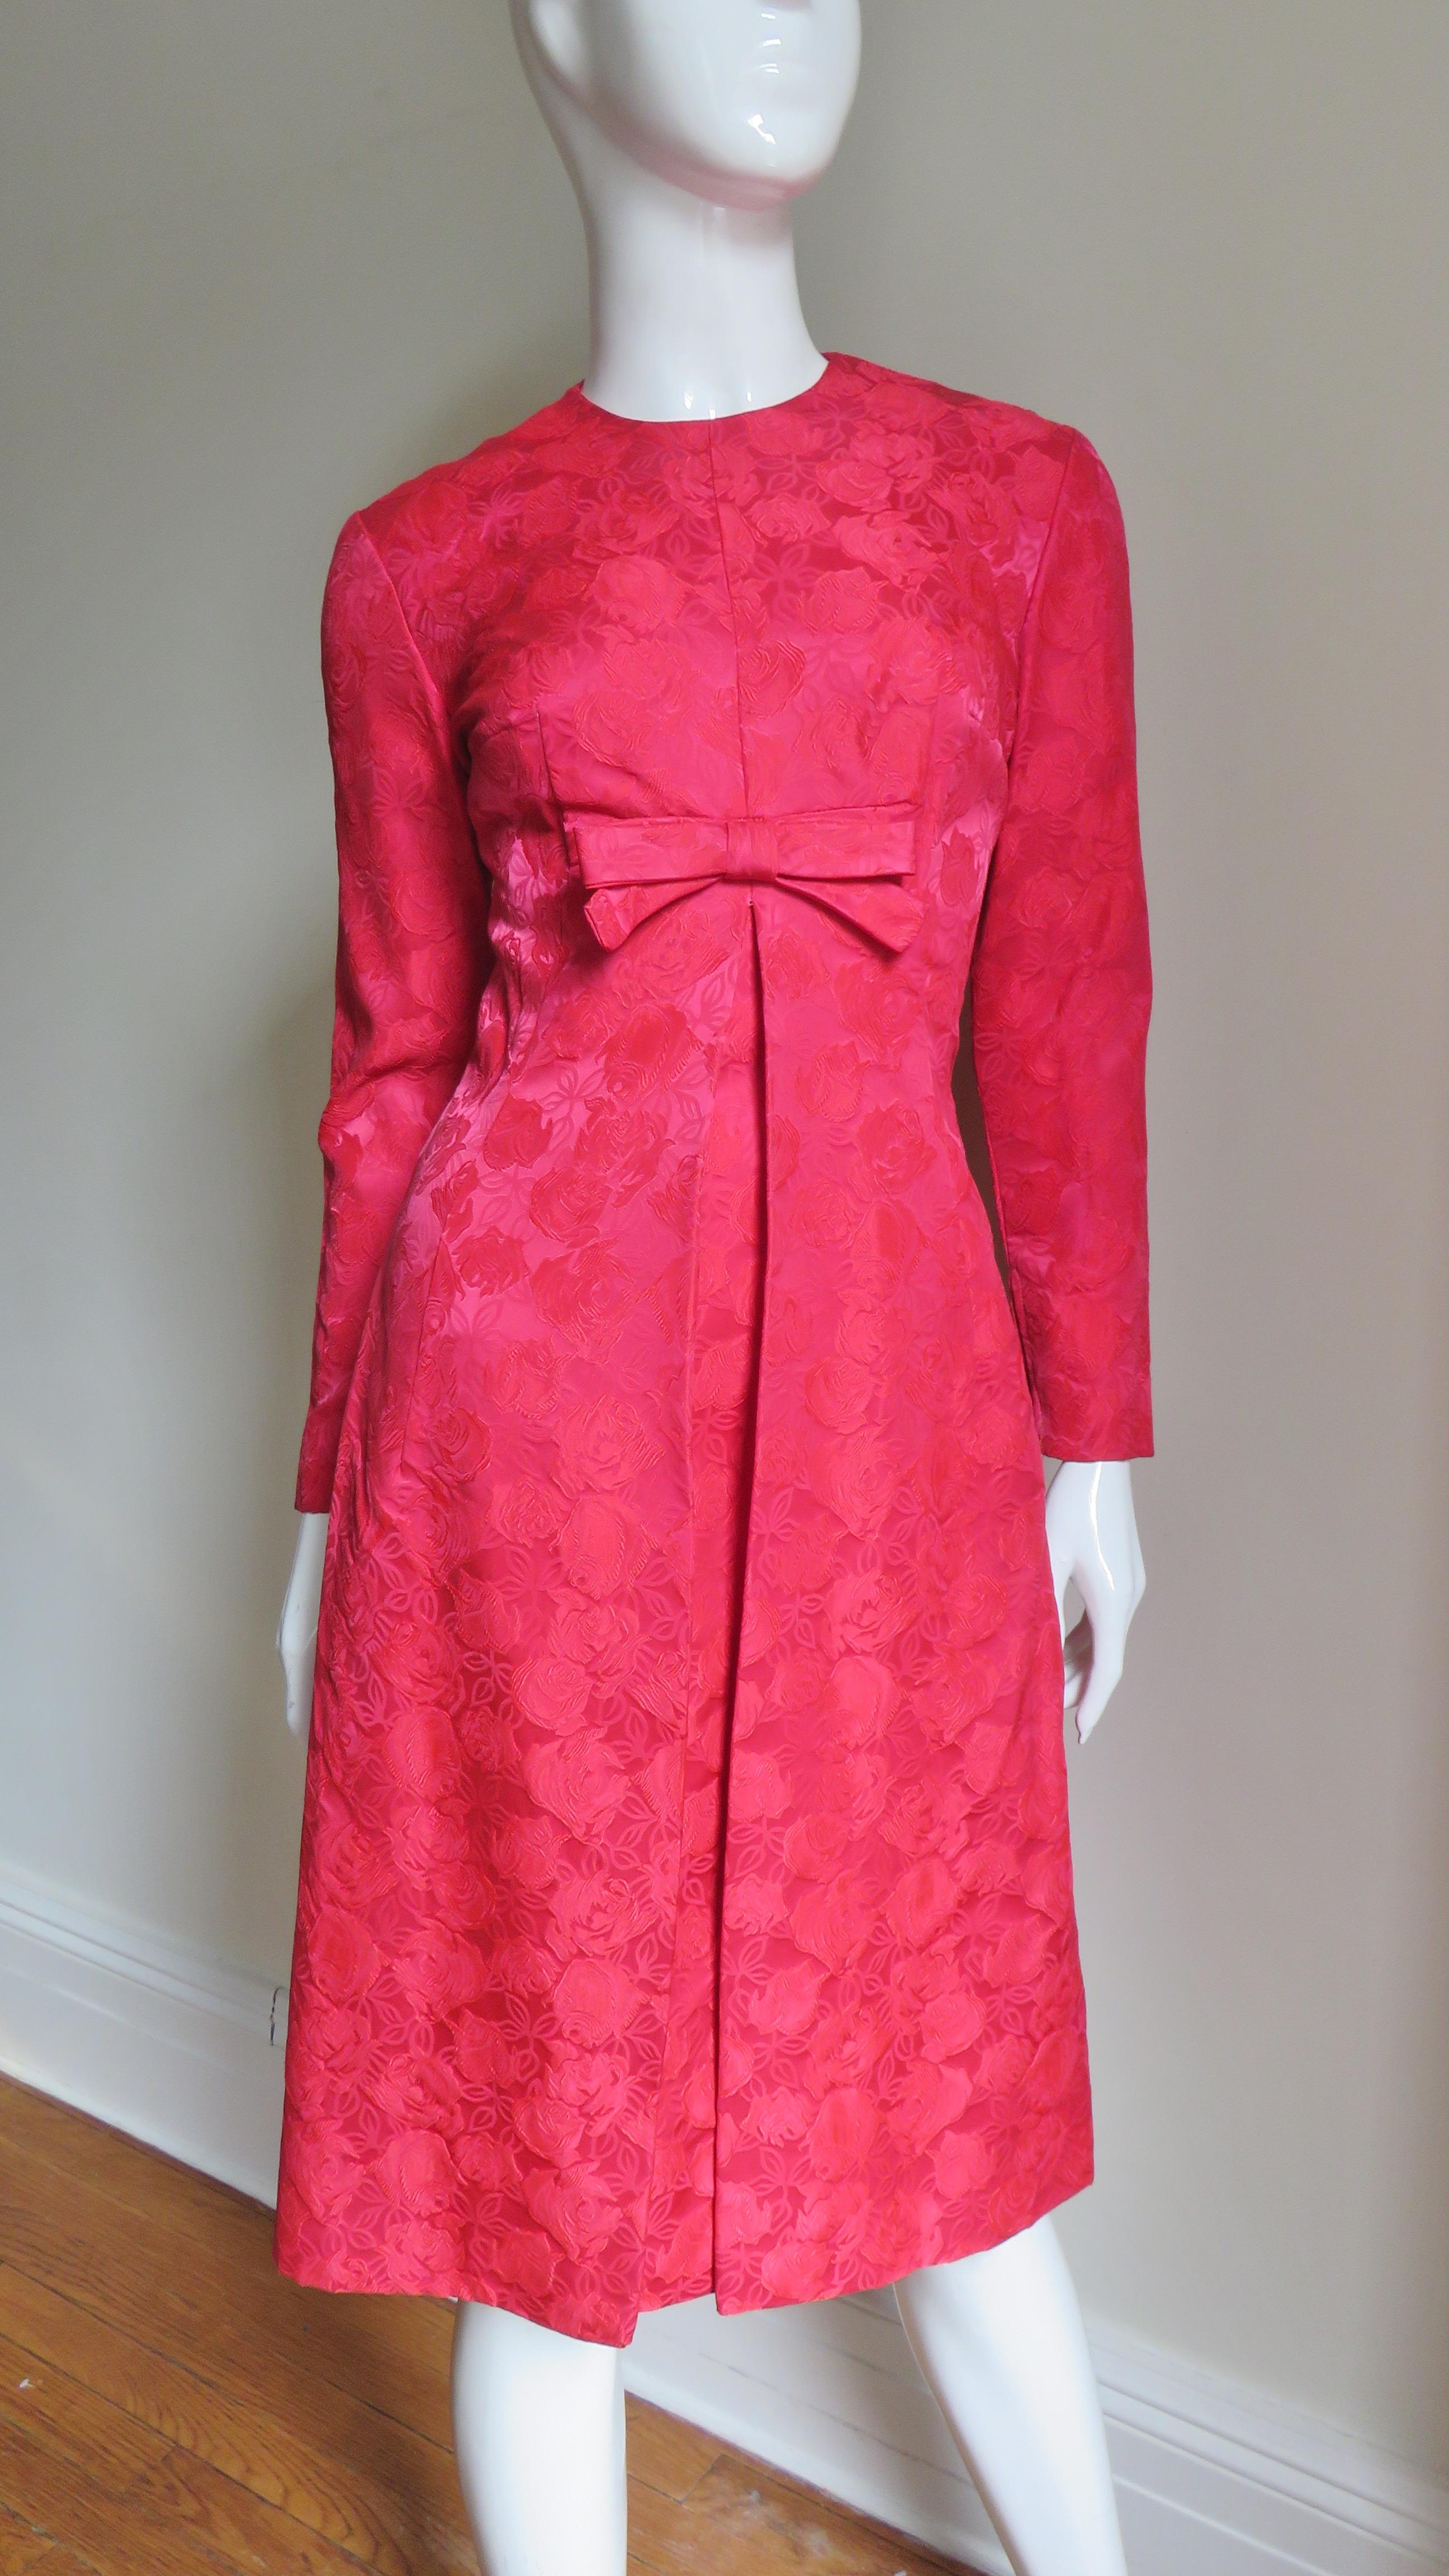 Suzy Perette New Damask Dress and Overdress 1950s 7